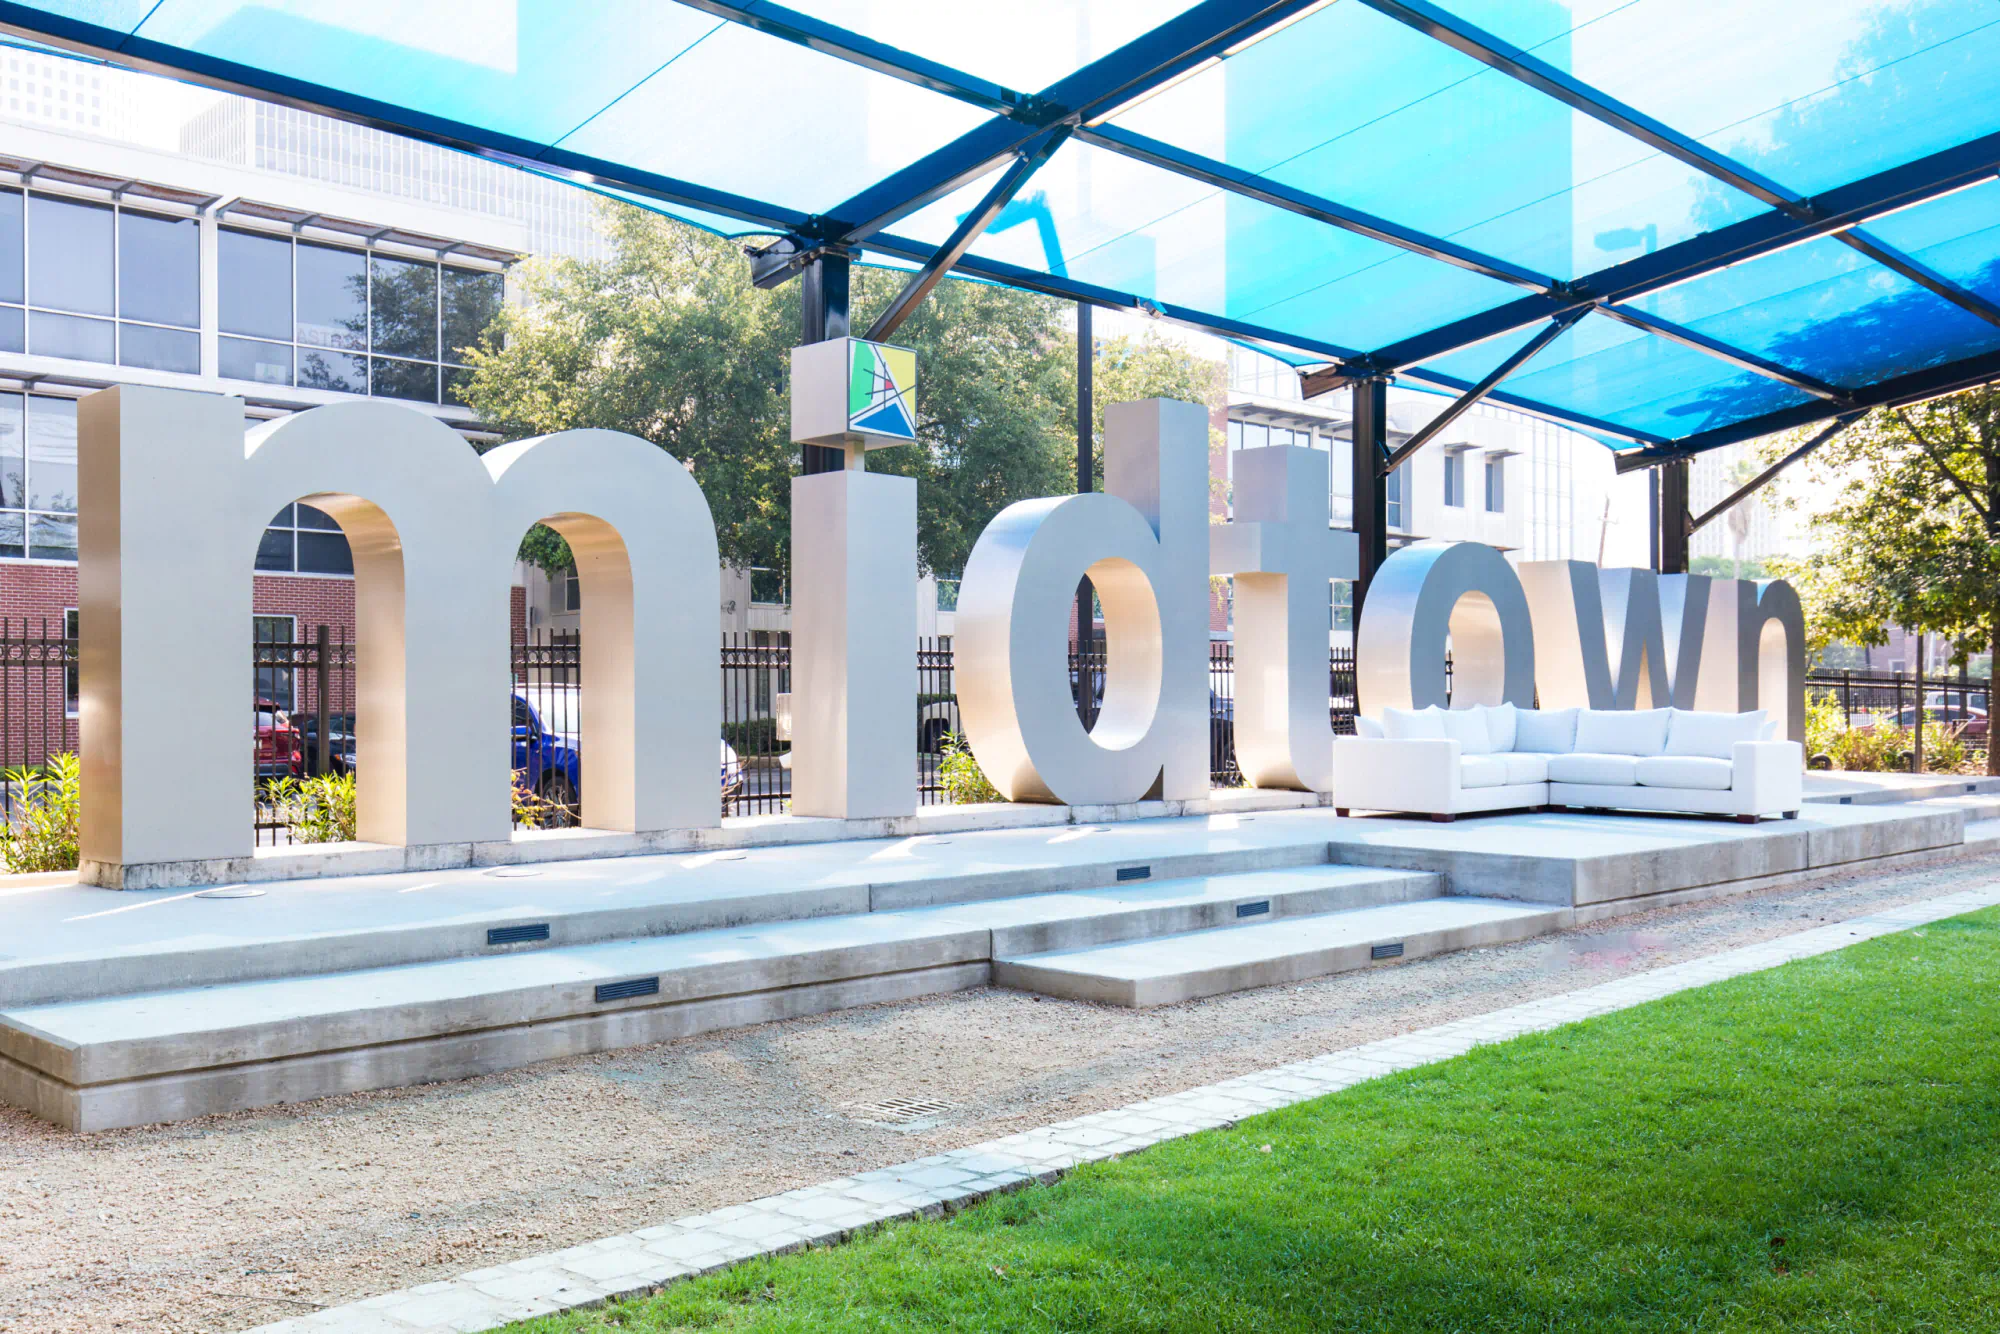 Sculpture of the word Midtown with a couch next to it